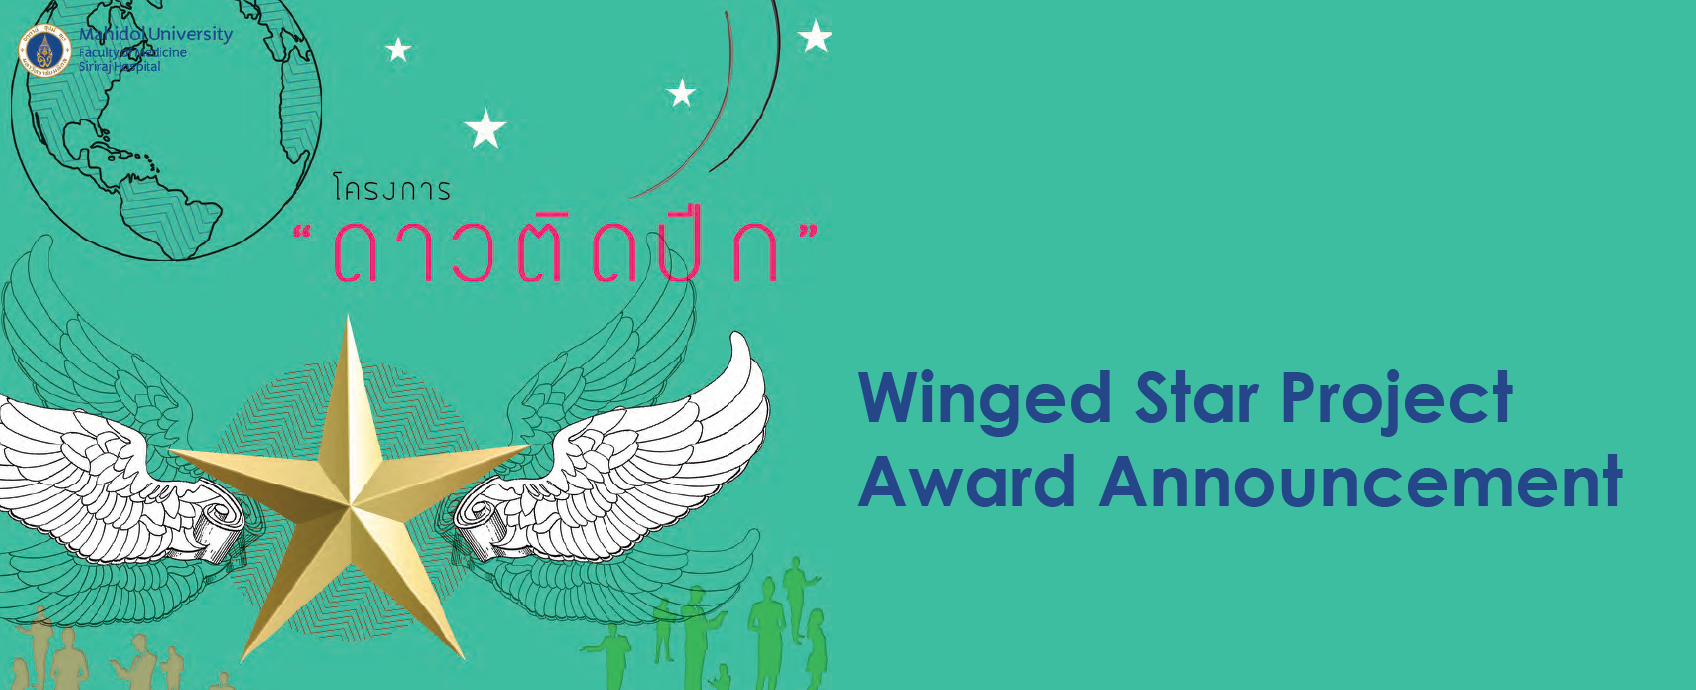 Winged Star Project Award Announcement